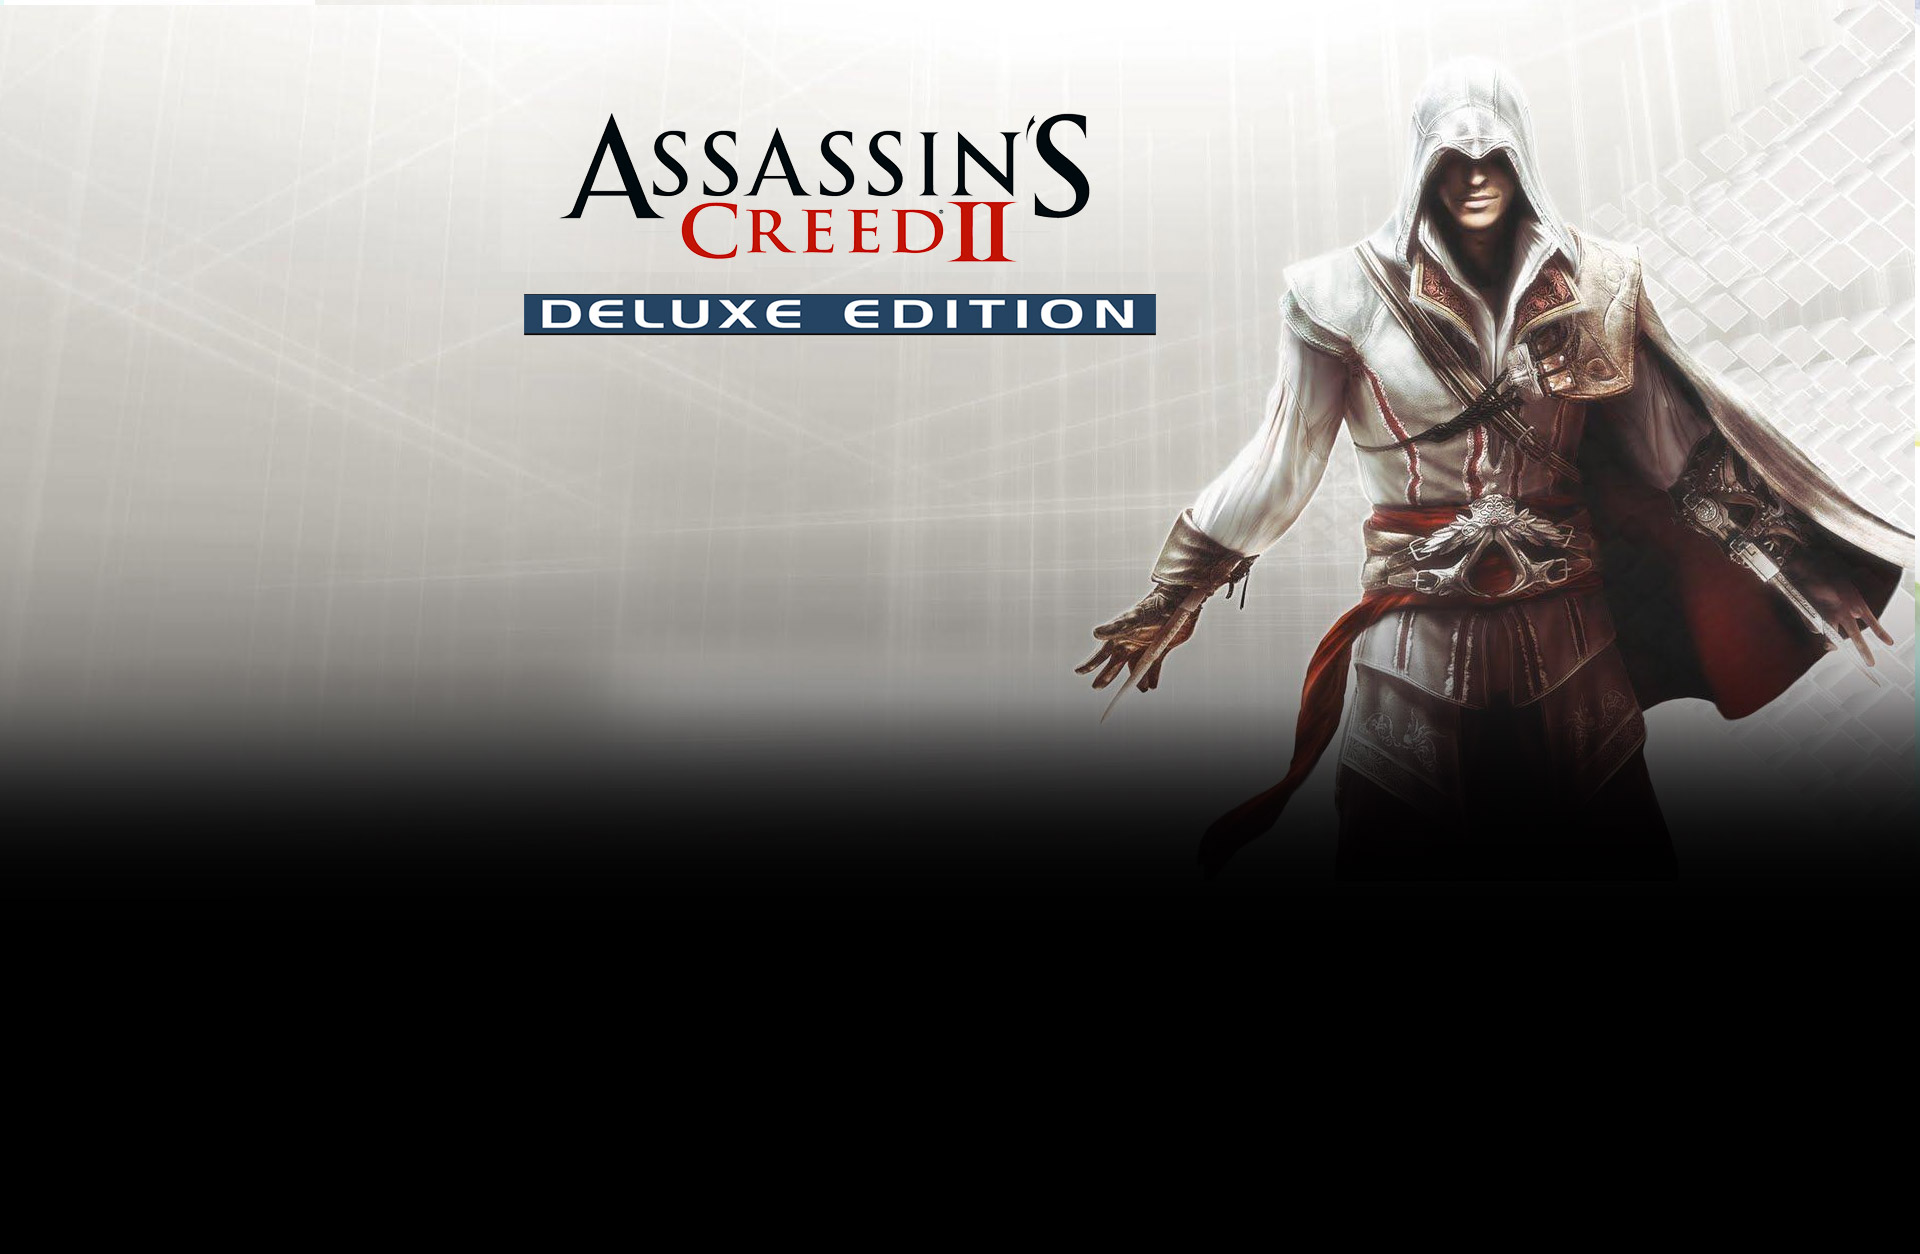 Assasin Screed 2 Deluxe. Assassins Creed 2 Deluxe Edition. Королевский ассасин. Русификатор ассасин крид 2